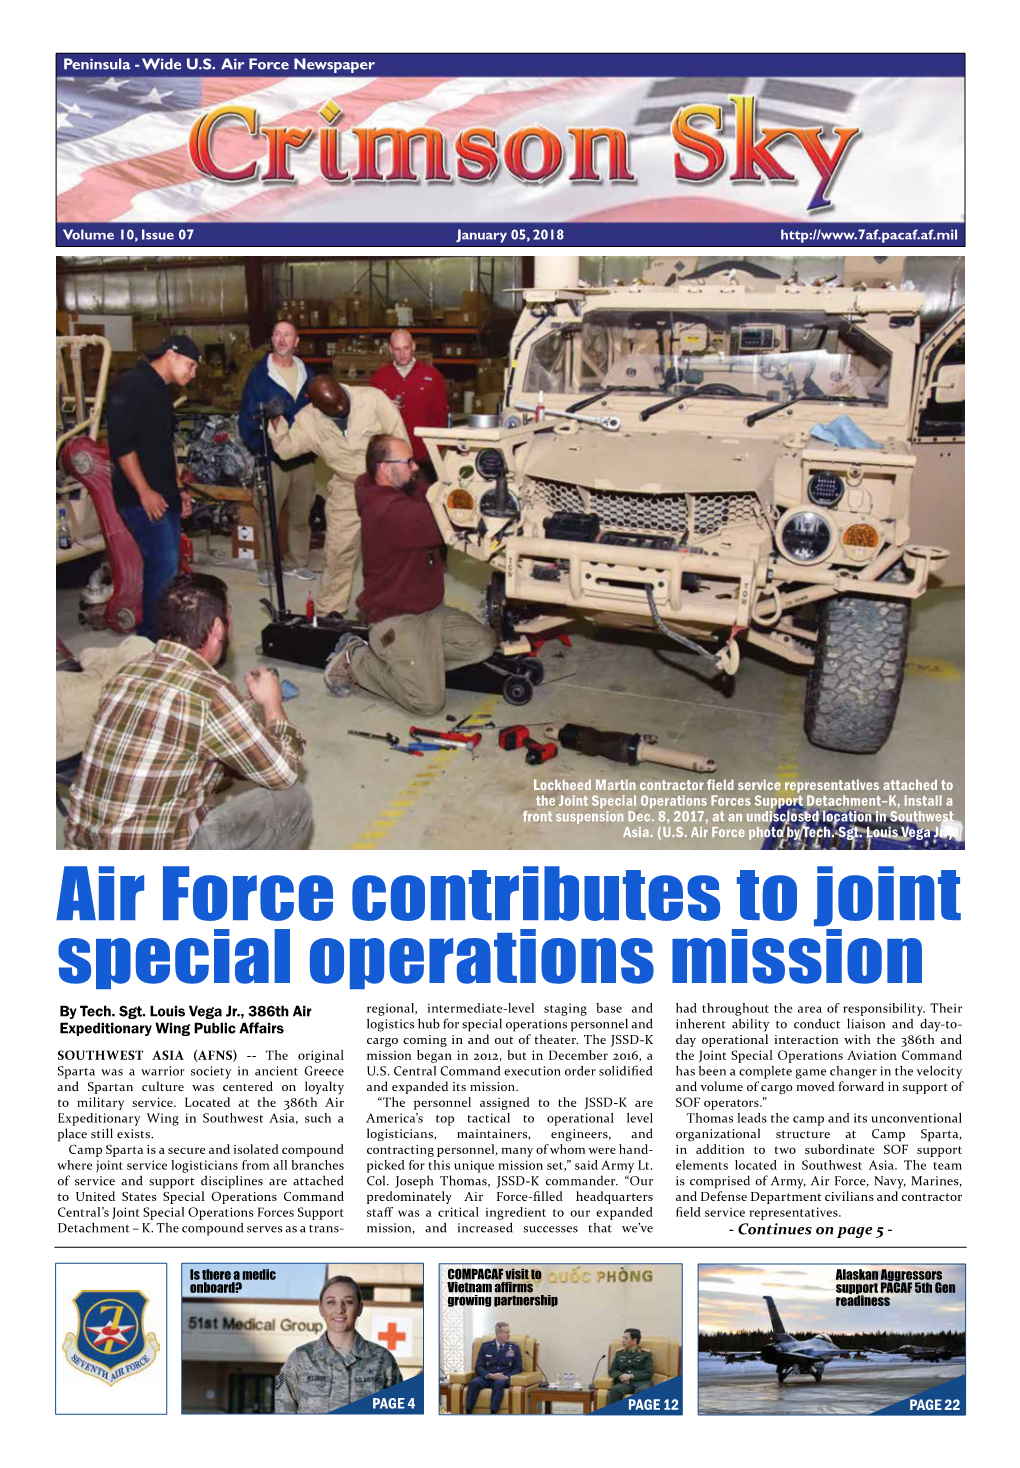 Air Force Contributes to Joint Special Operations Mission by Tech